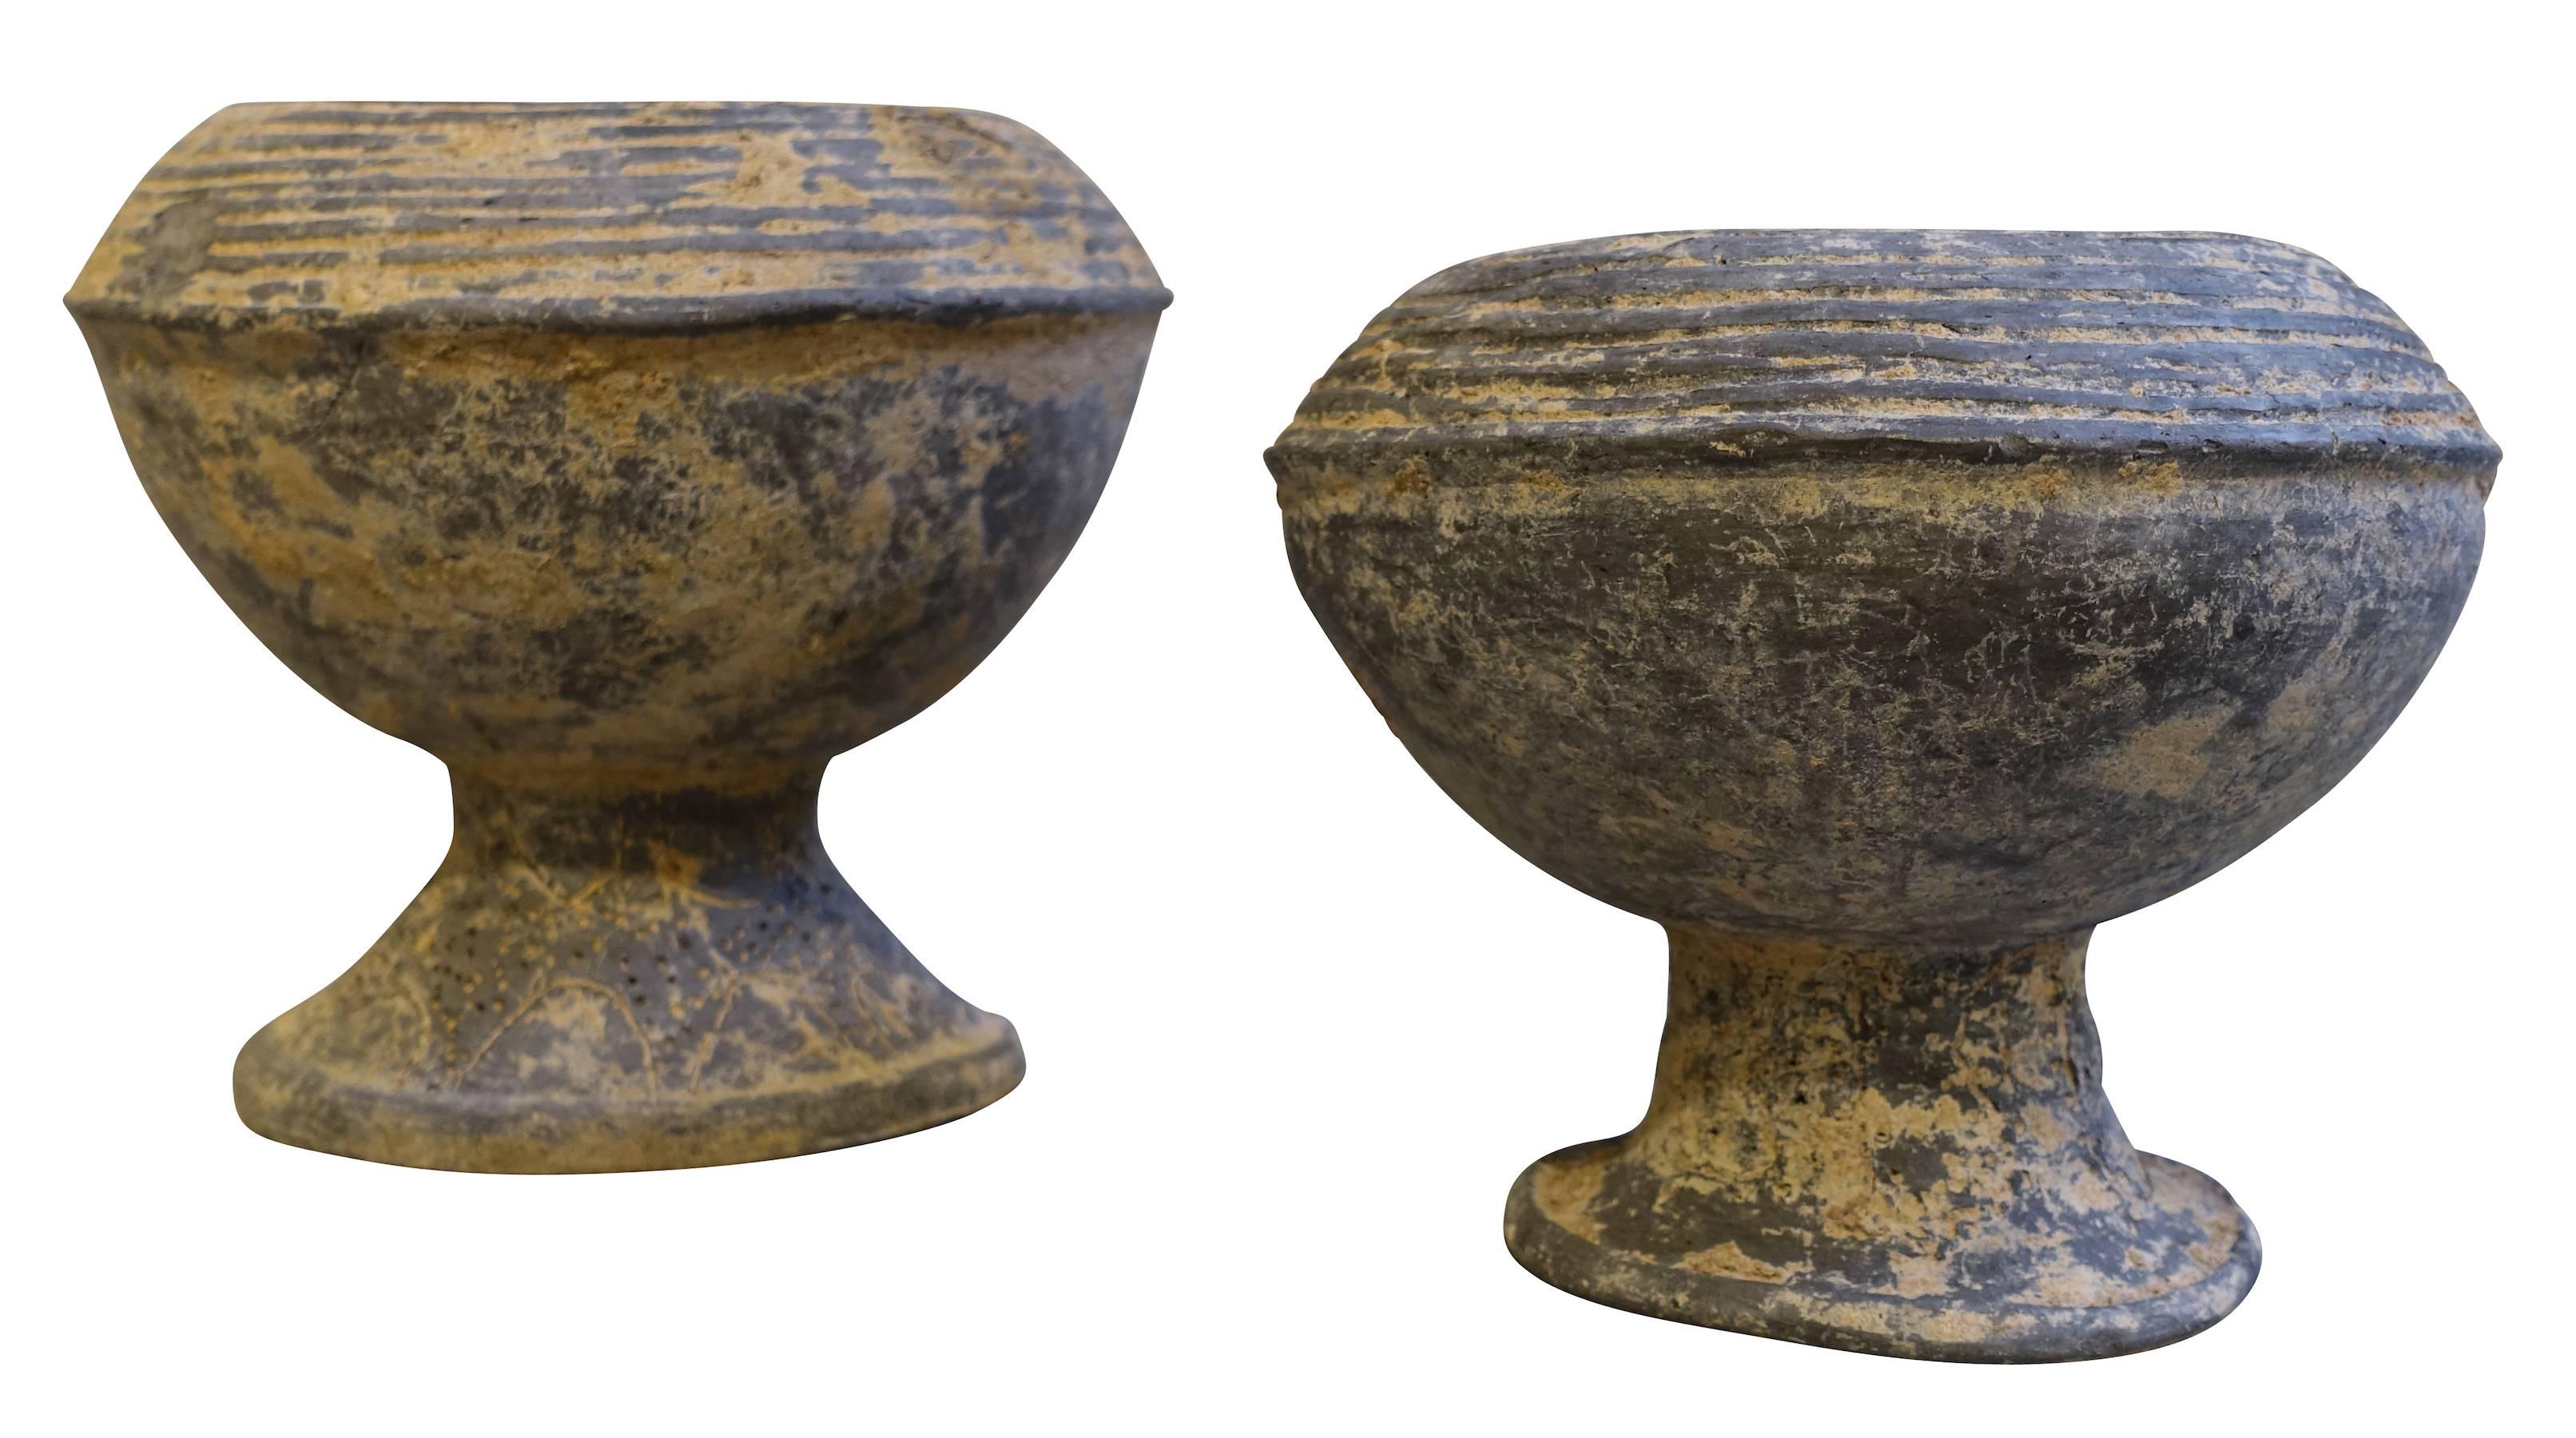 18th century vases from the Khmer people of Cambodia.
Decorative ribbed details.
Weathered with beautiful natural patina.
Two available ( S4697 and S4698 )
S4697 measures 8 inches diameter x 6 inches height
S4698 measures 8 diameter x 7